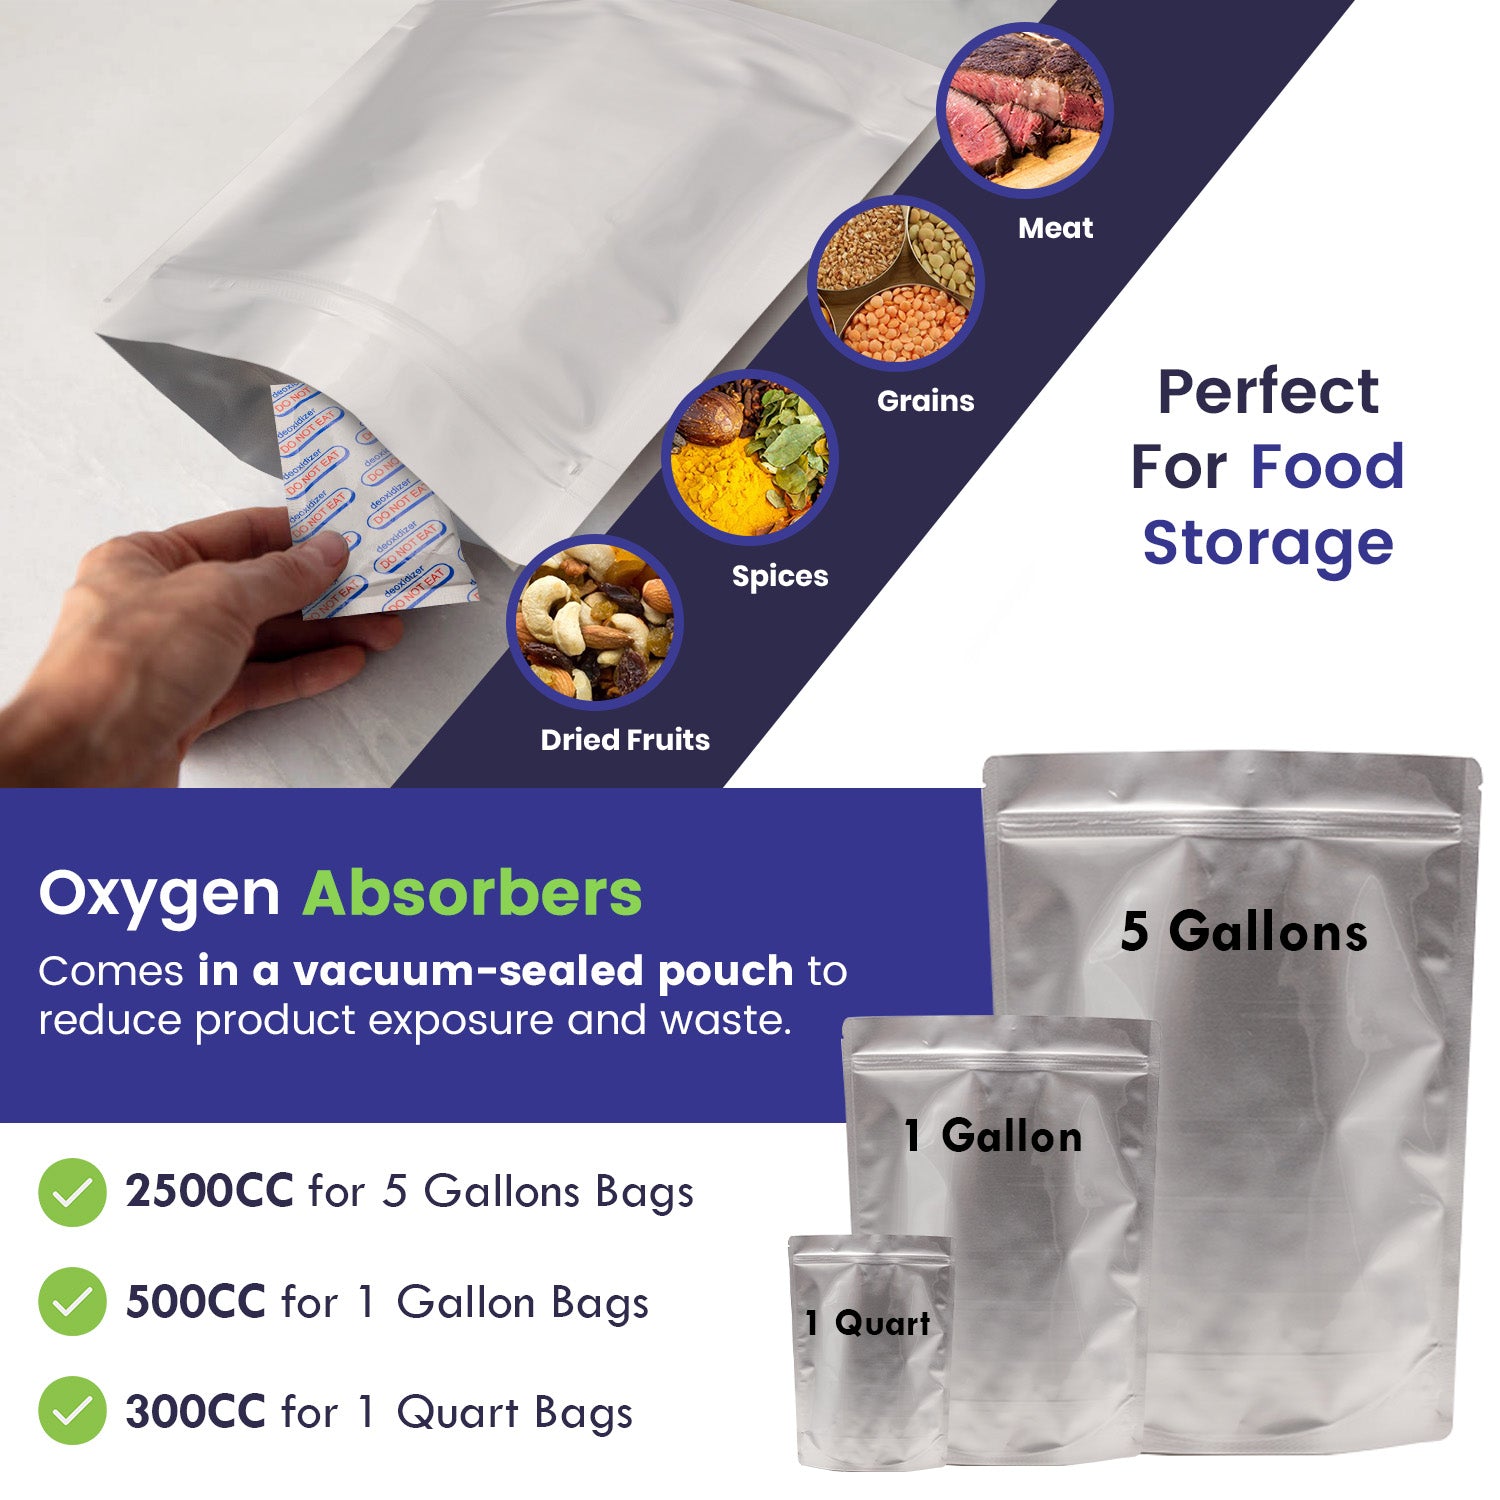 5 Gallon Mylar Bags with 2500CC Oxygen Absorbers and Labels, Zipper  Resealable Pouches Heat Sealable Bags for Long Term Food Storage (10 pcs)